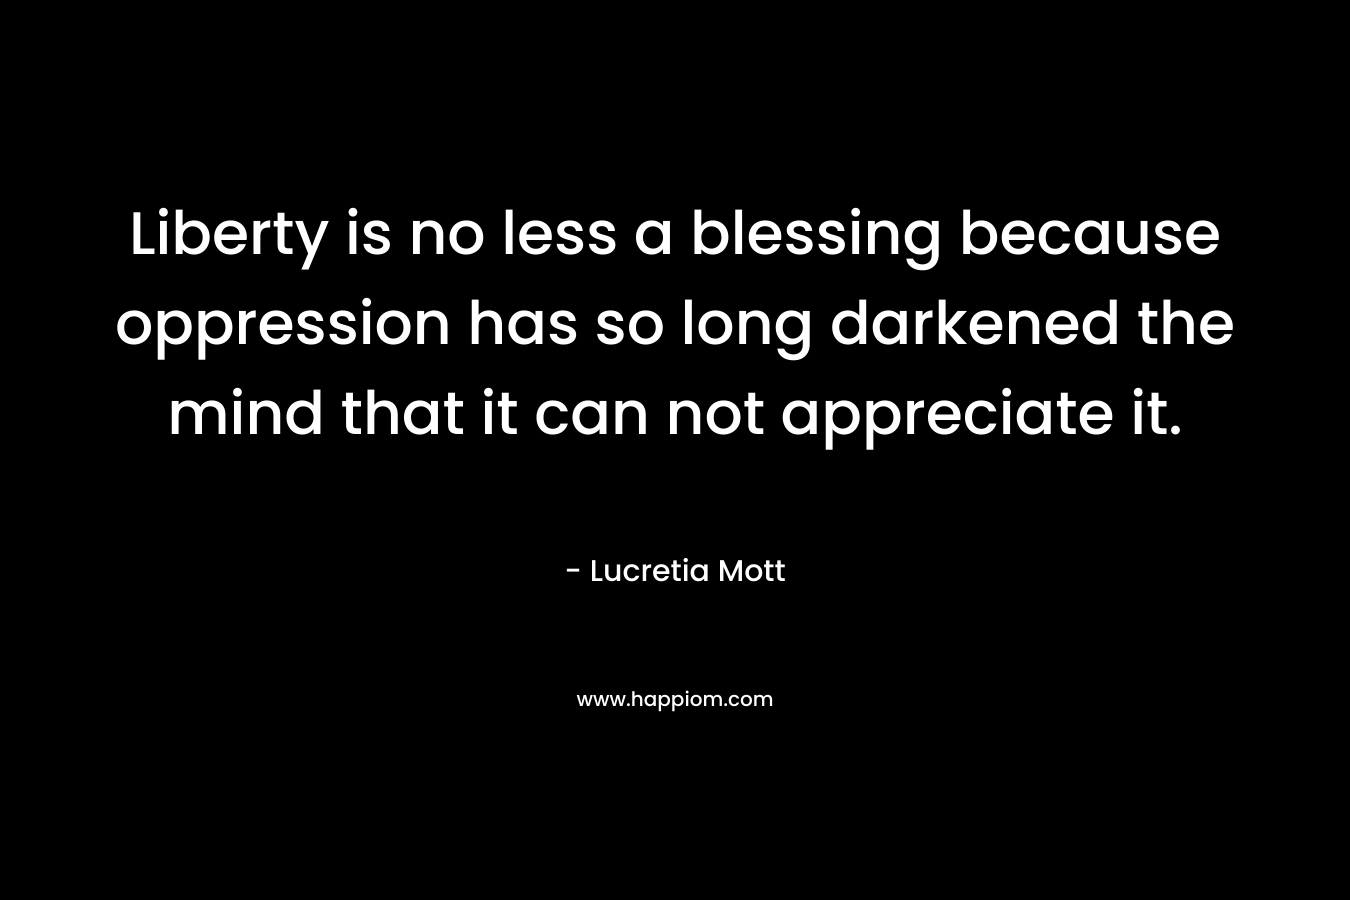 Liberty is no less a blessing because oppression has so long darkened the mind that it can not appreciate it. – Lucretia Mott